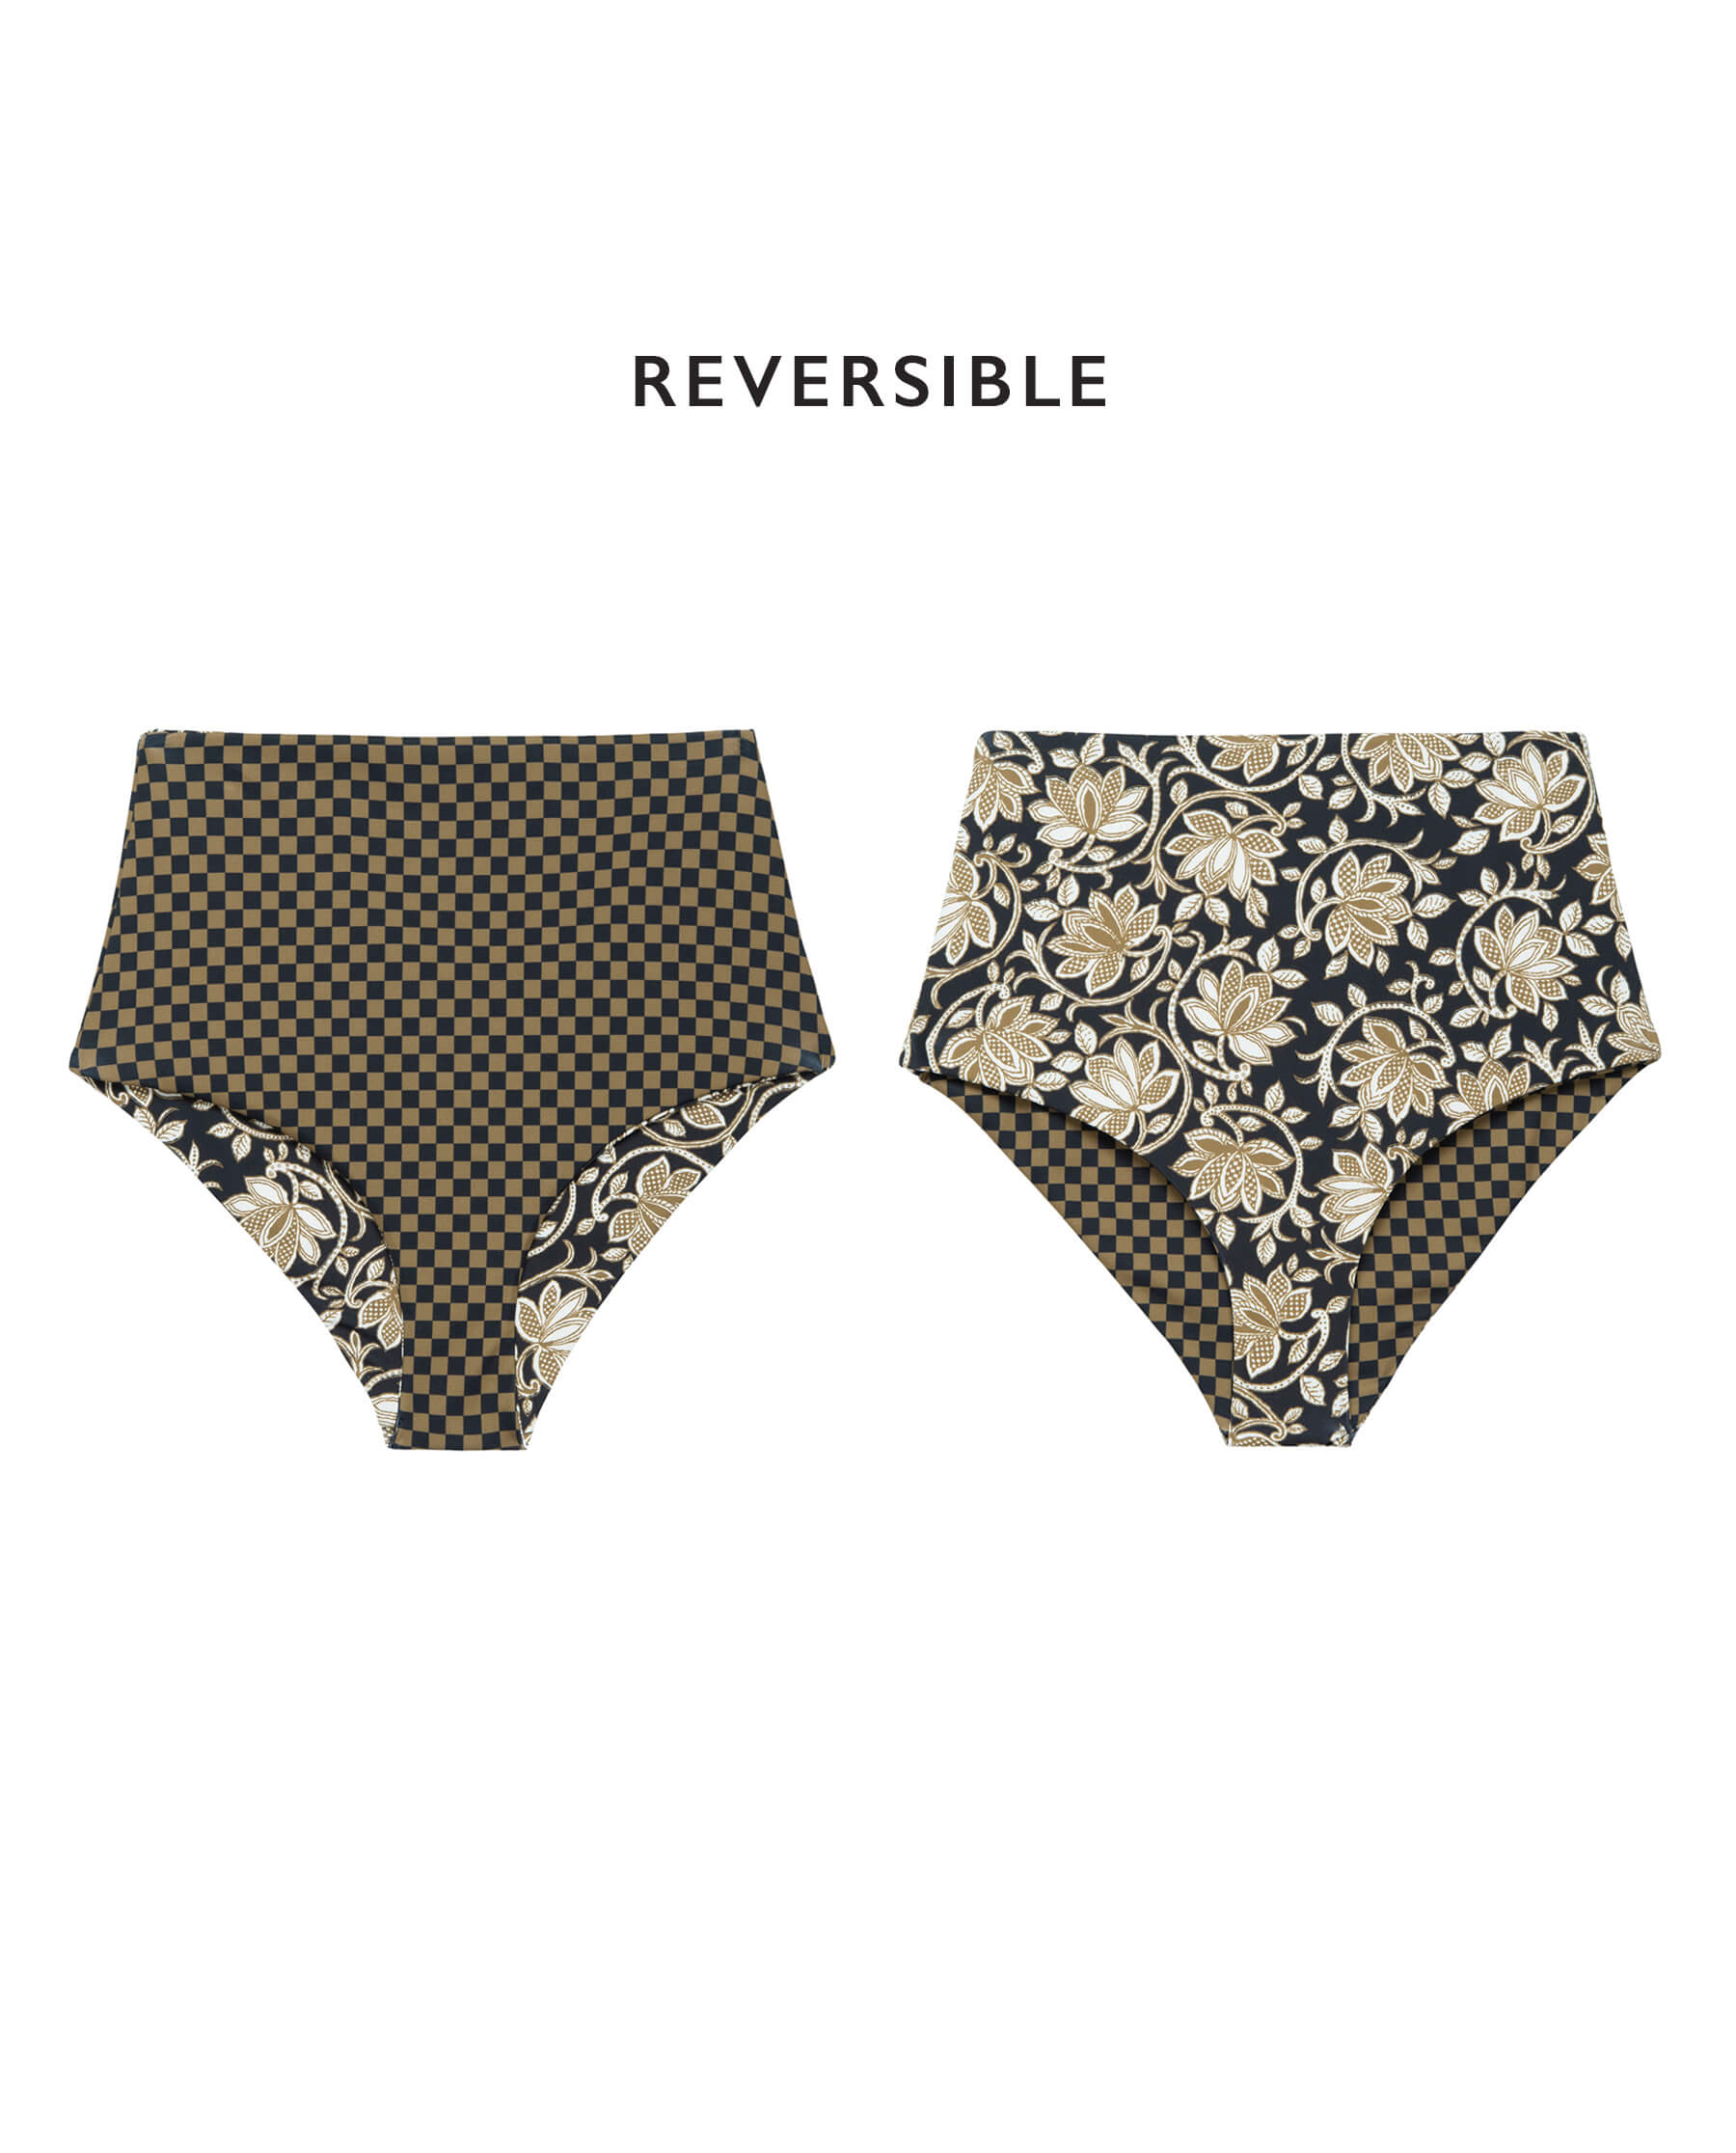 The Reversible Mid-Rise Brief. -- Black Oasis Floral and Bronze Check SWIM BOTTOMS THE GREAT. SP24 SWIM